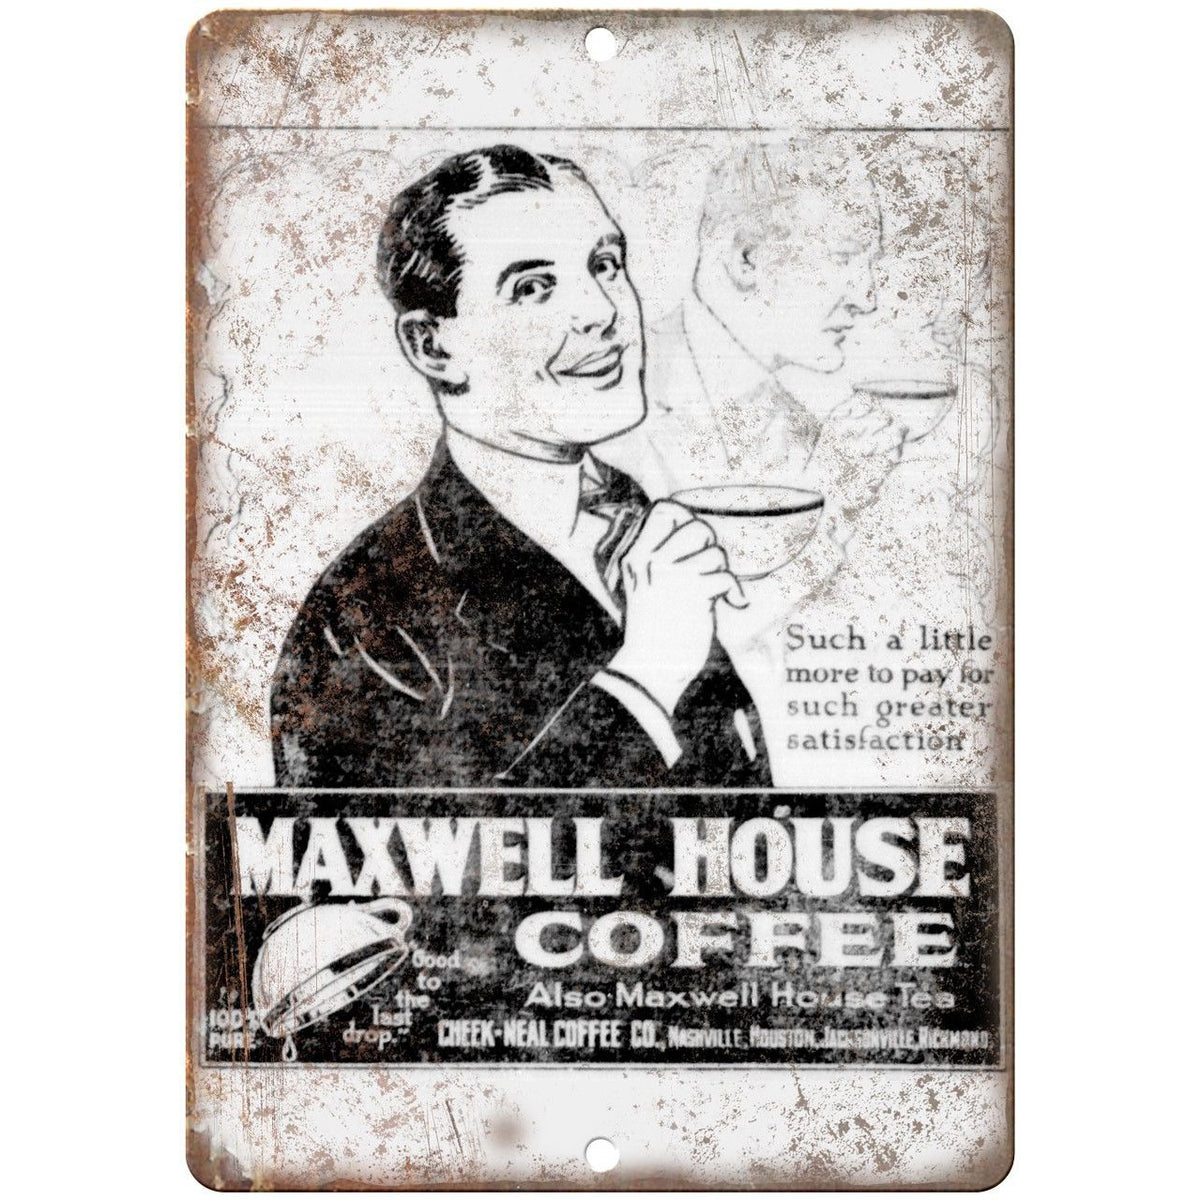 Maxwell House Advertising Wall Thermometer – It's Bazaar on 21st